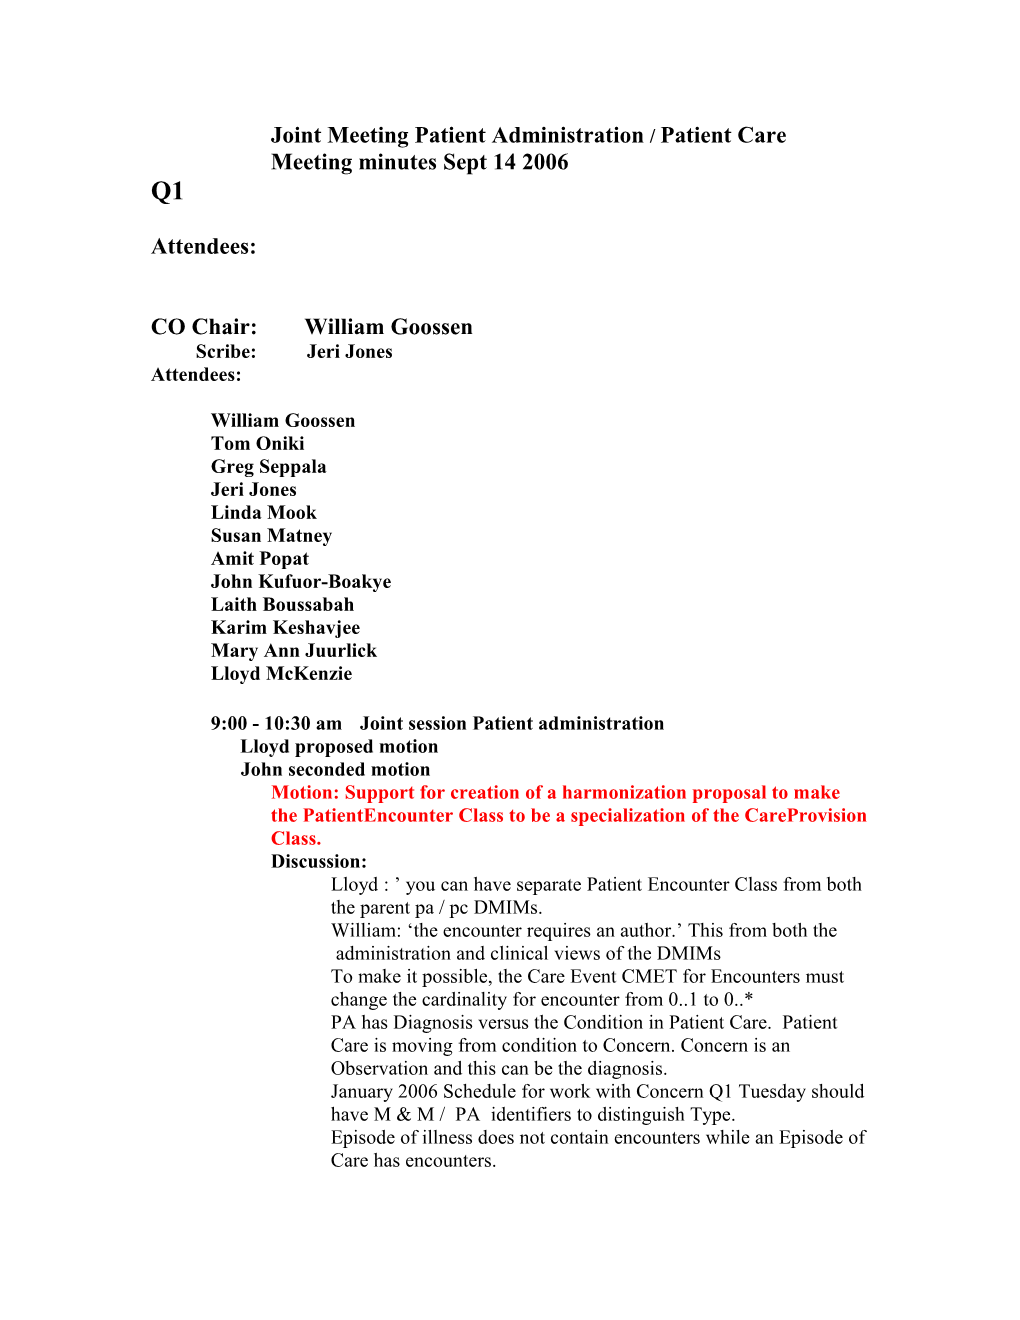 Joint Meeting Patient Administration / Patient Care Meeting Minutes Sept 14 2006